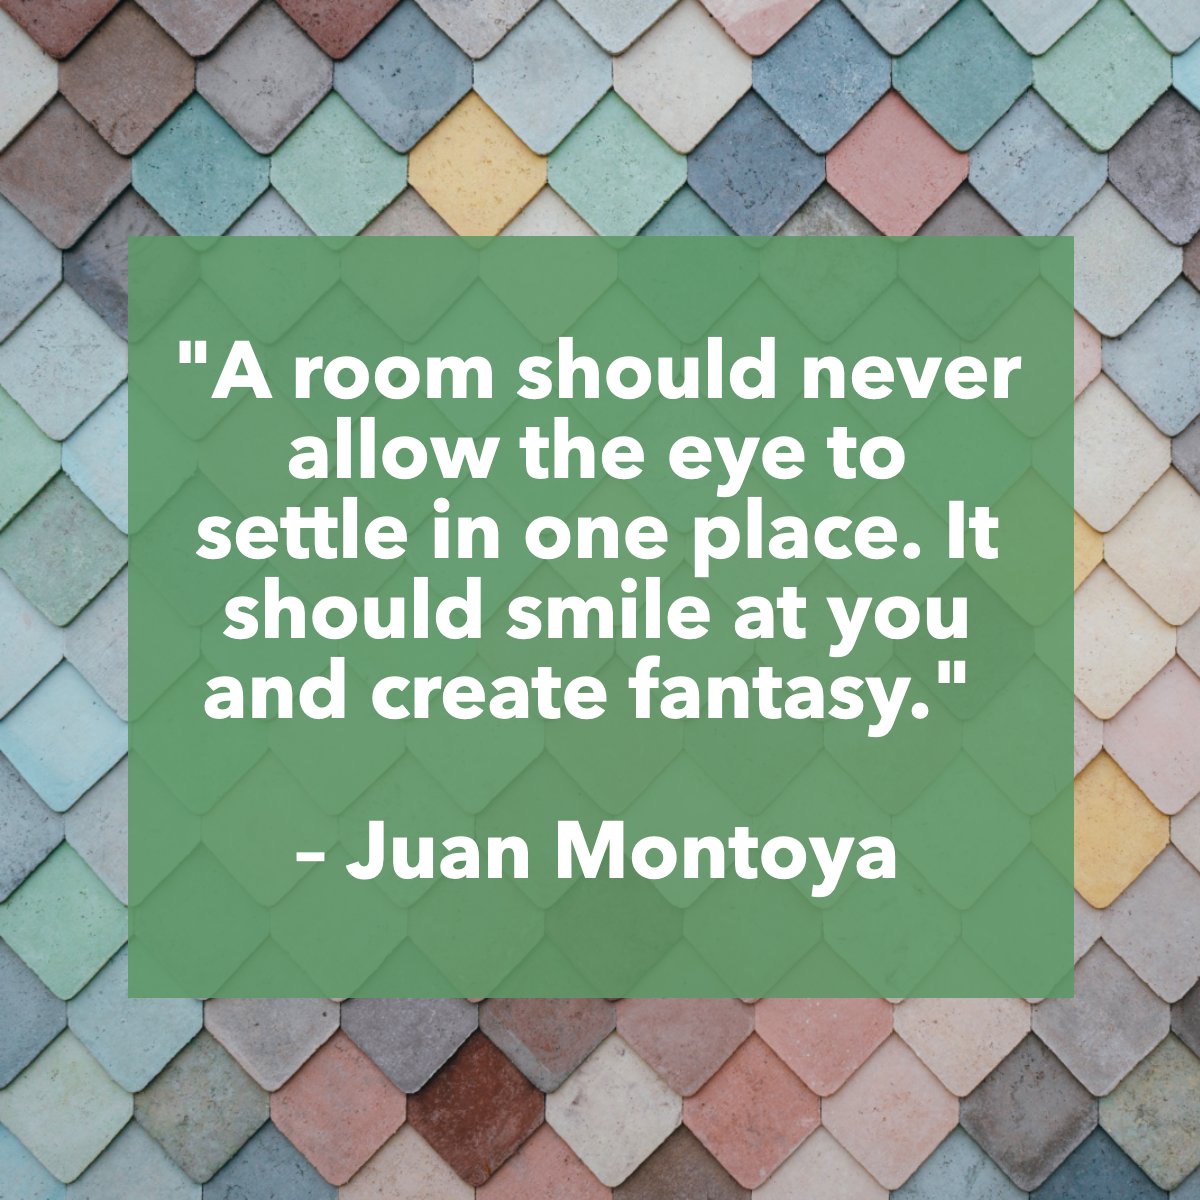 'A room should never allow the eye to settle in one place. It should smile at you and create fantasy.'
― Juan Montoya 📖

#design #roomdesign #decor #interior #inspiring #quote #quoteoftheday
 #riscosells #theriscogroup #kwmainline #Uptownliving